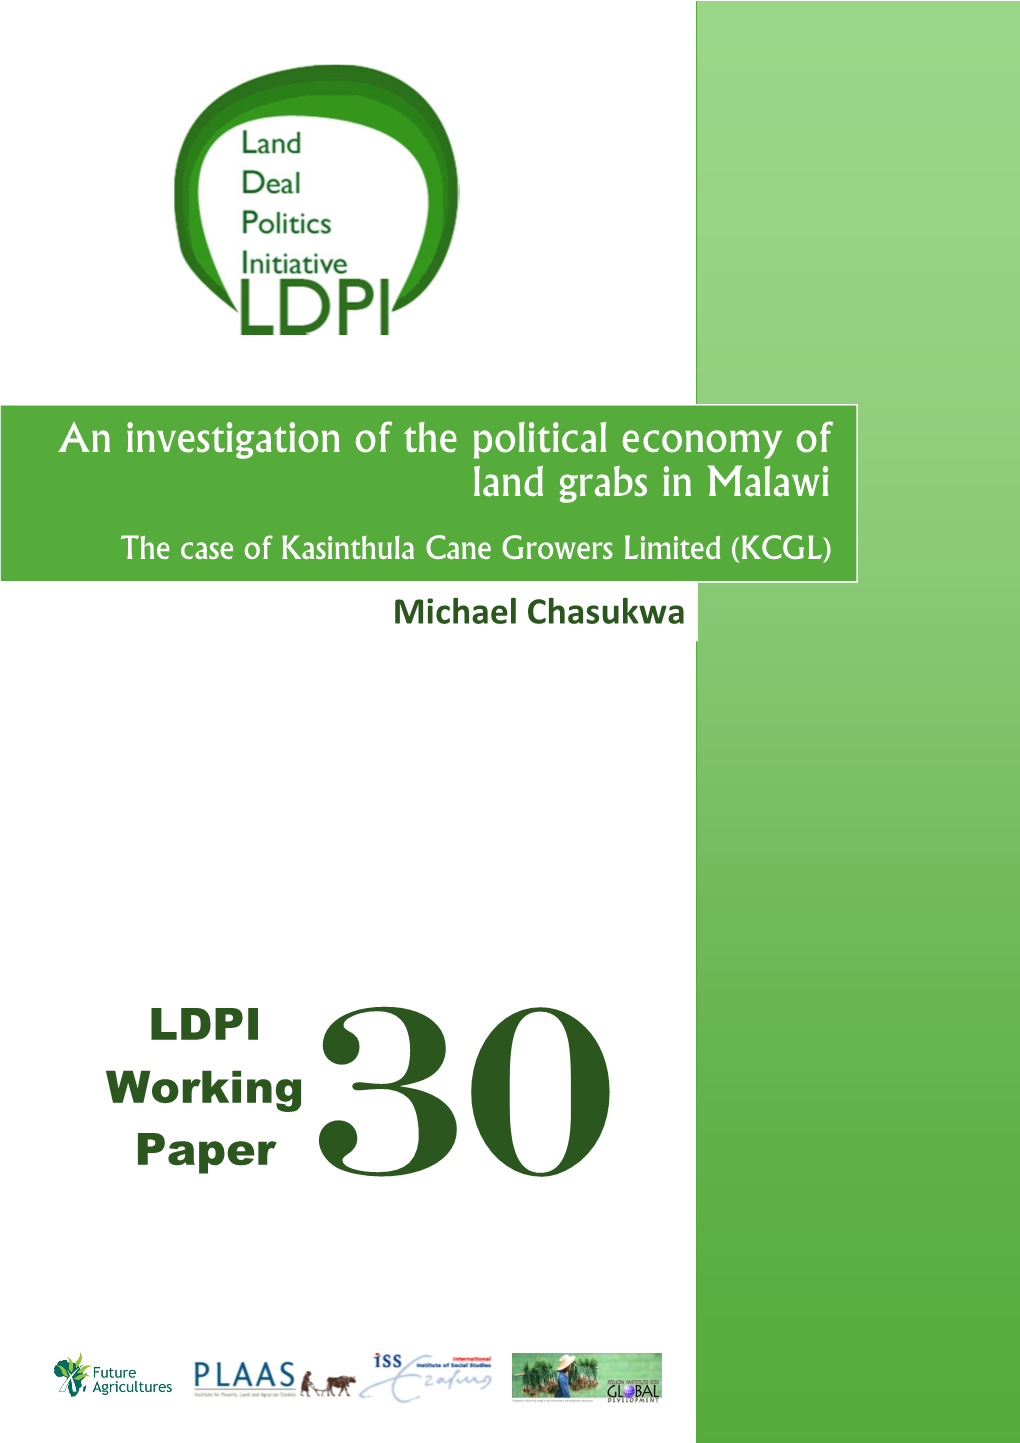 An Investigation of the Political Economy of Land Grabs in Malawi LDPI Working Paper